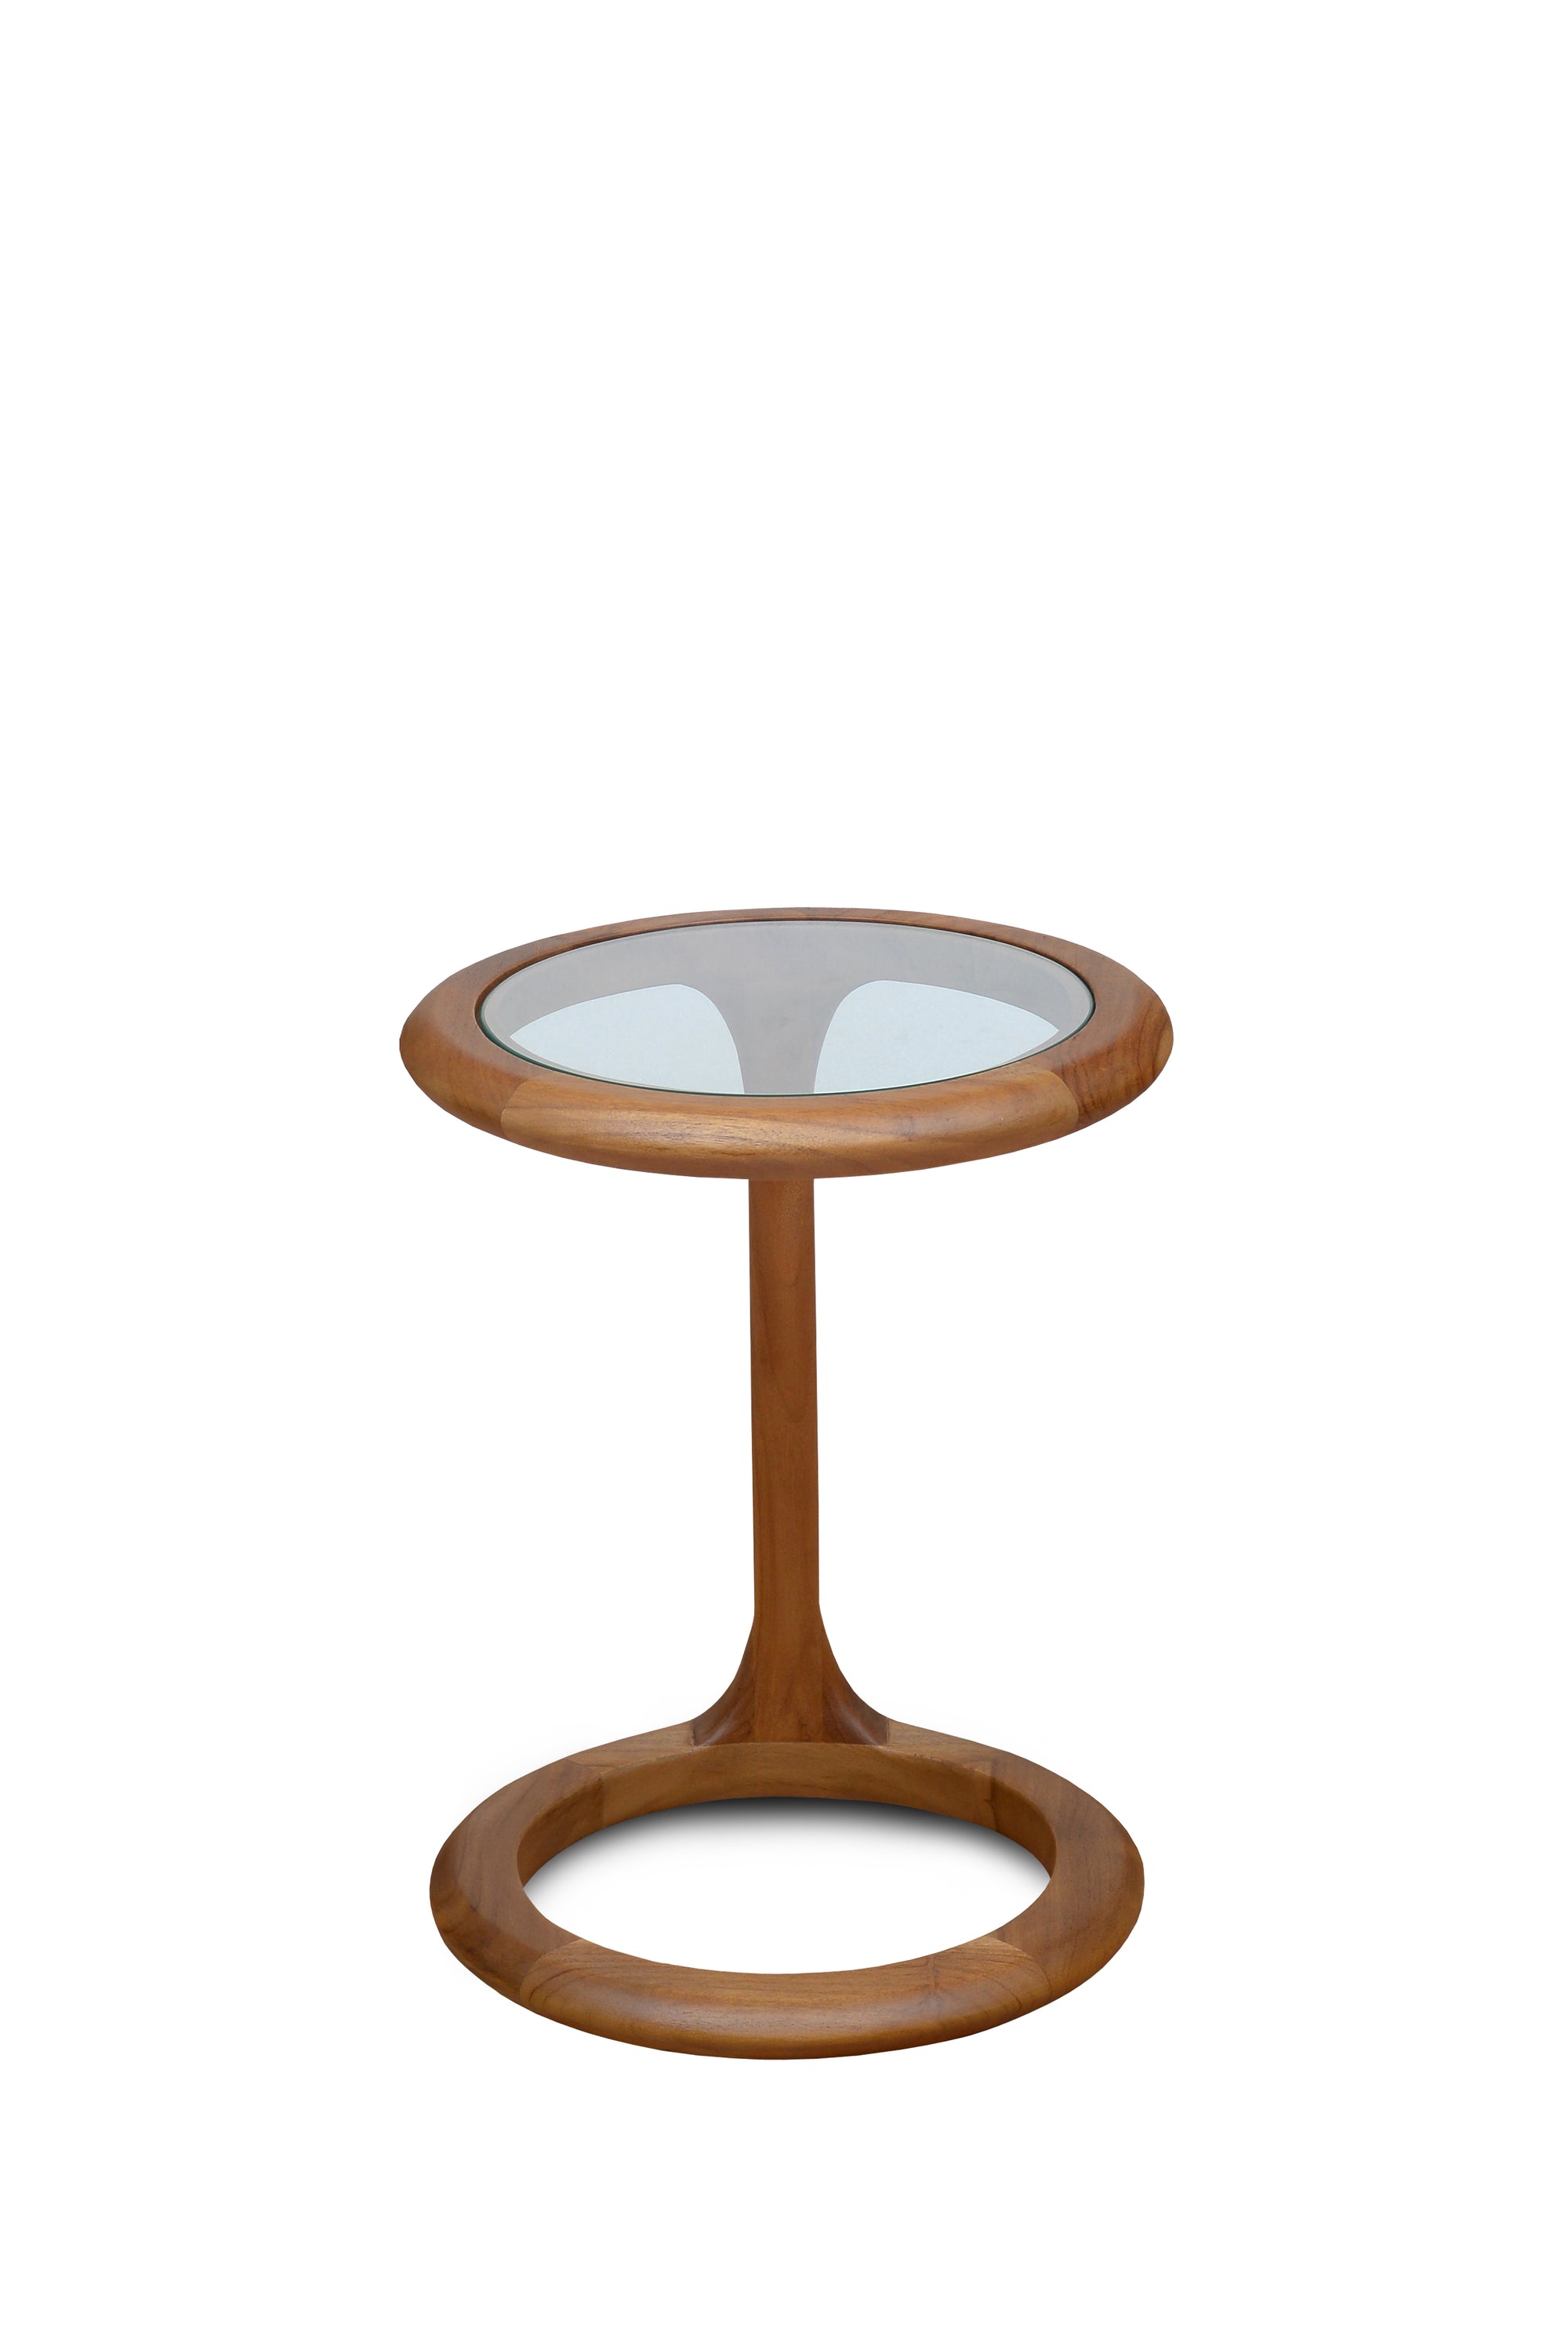 Nido Low Table Teak with Glass Top in Natural Finish